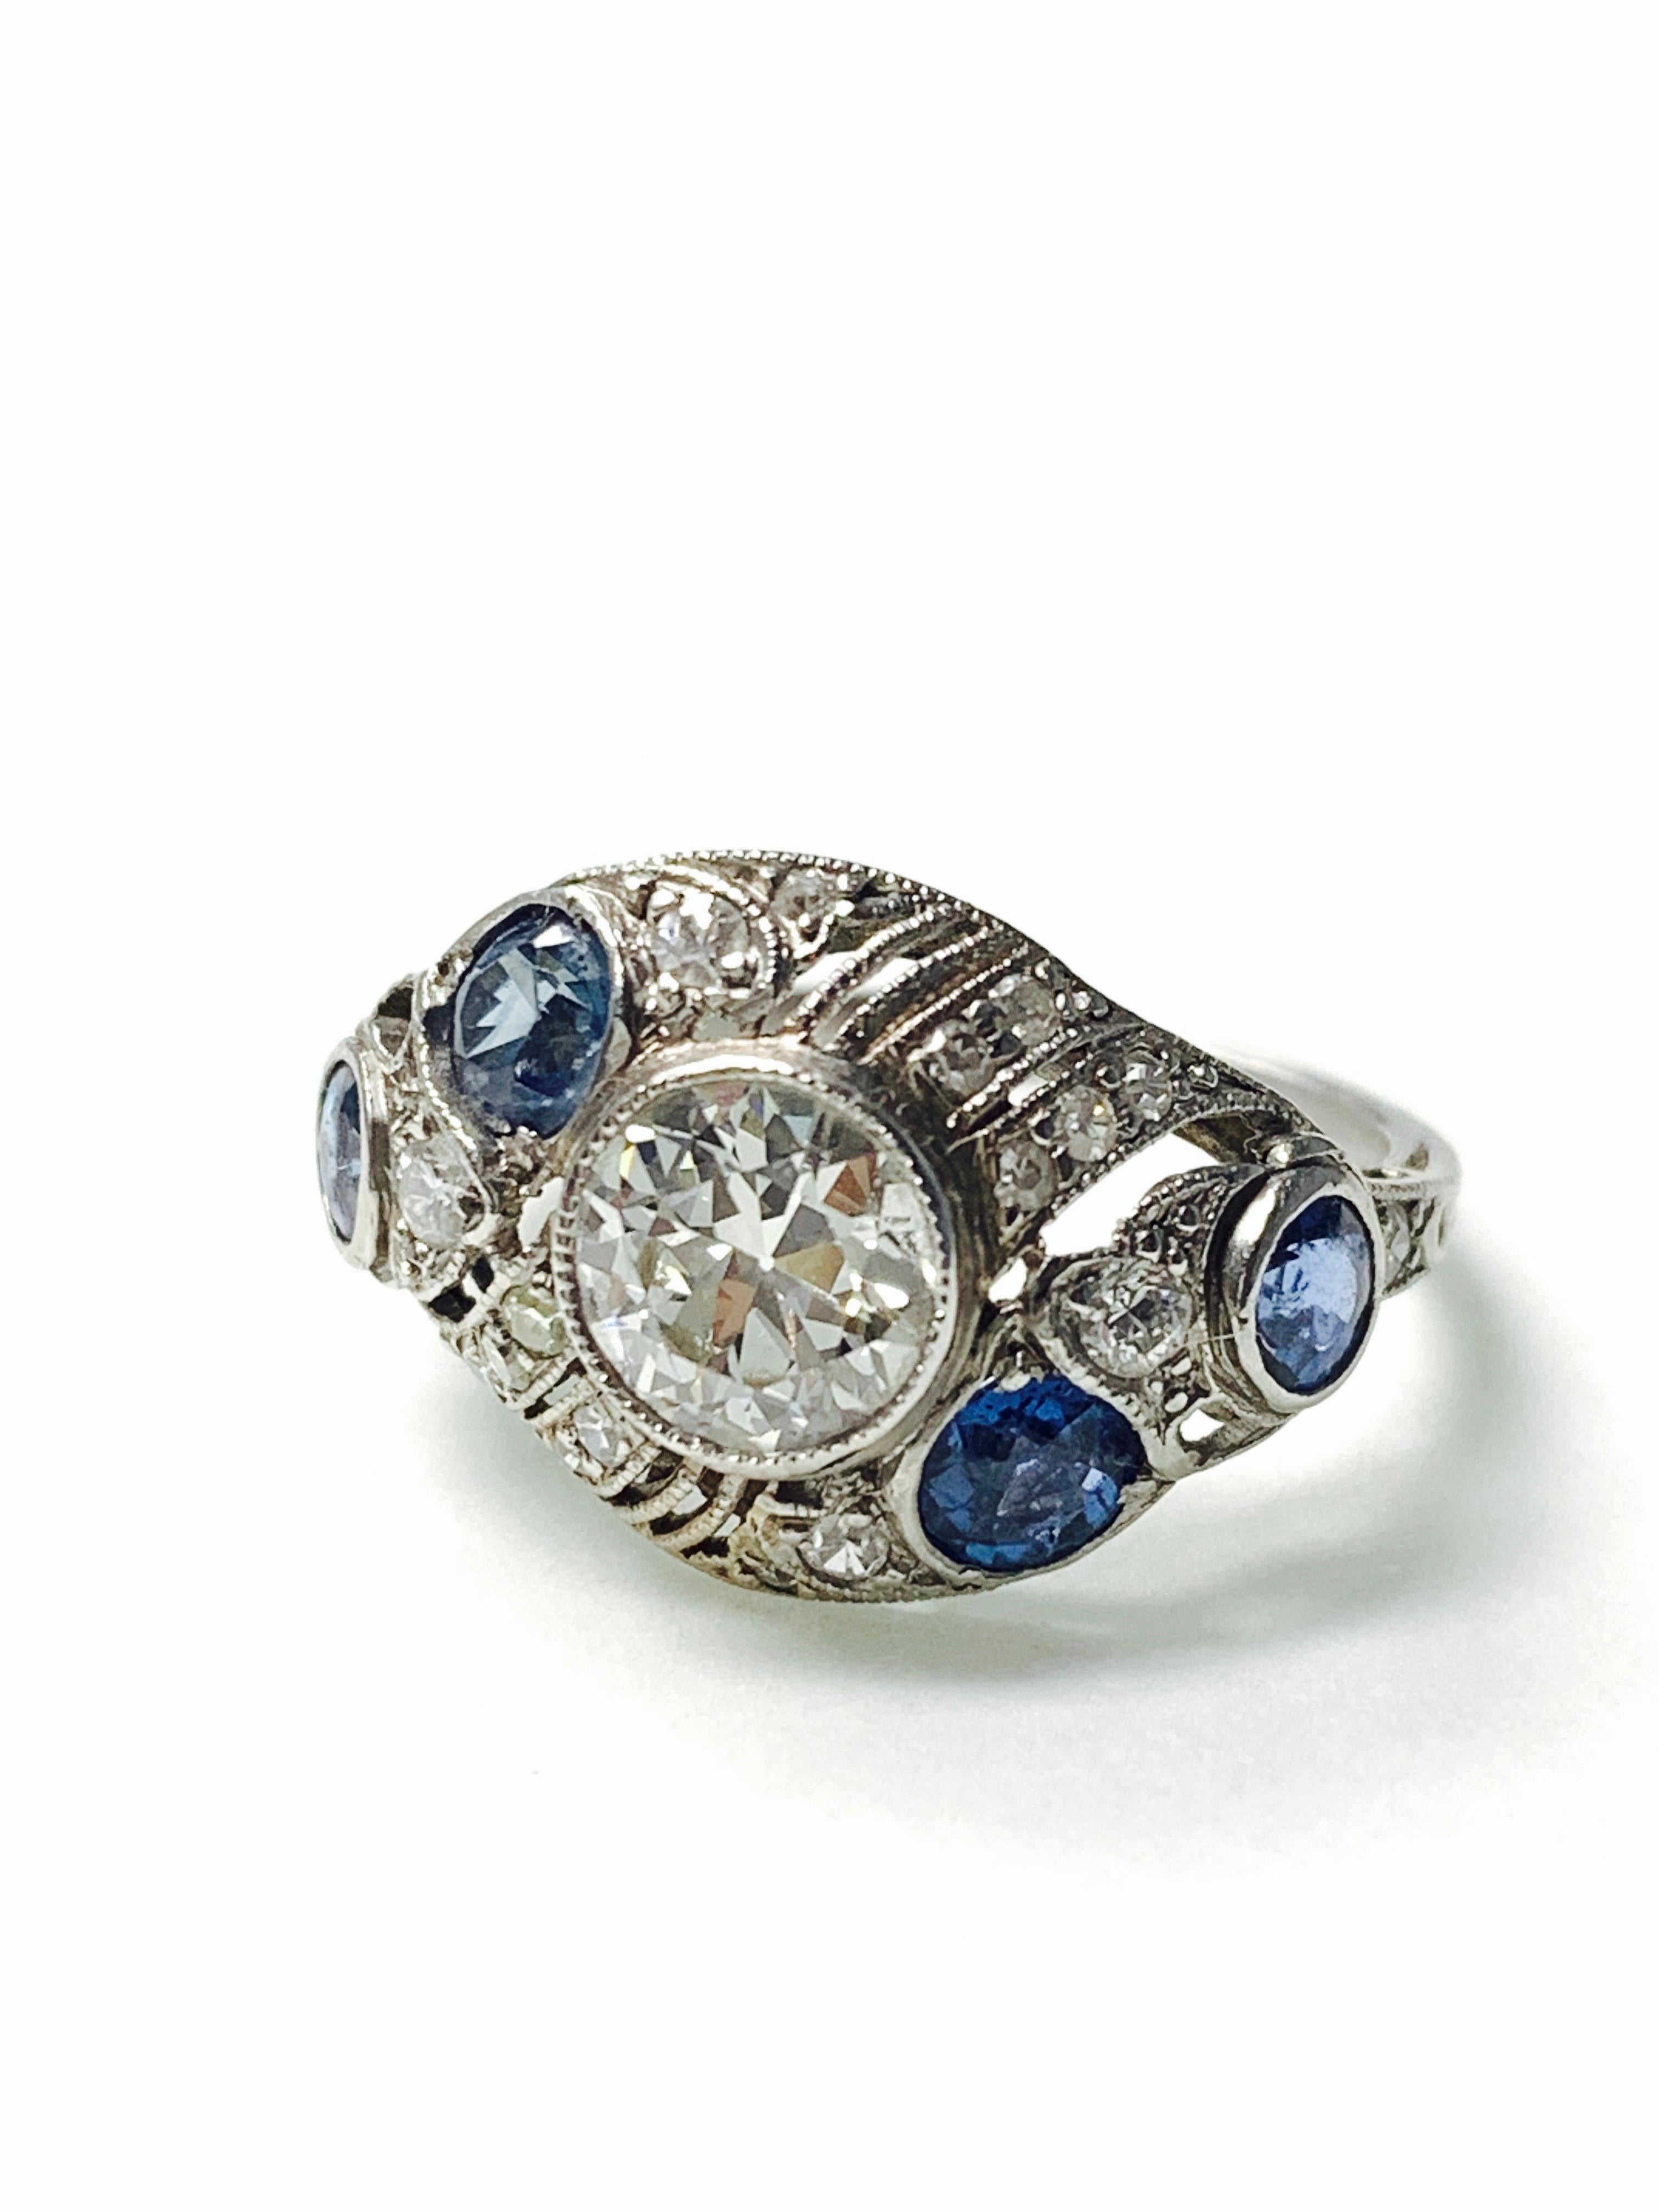 Antique old European cut diamond and blue sapphire ring handcrafted in platinum. 
The details are as follows : 
Diamond weight : 0.80 carat ( center ) ( H VS1) 
Diamond weight : 0.20 carat ( small diamonds ) ( HVS1 ) 
Blue sapphire weight : 0.60